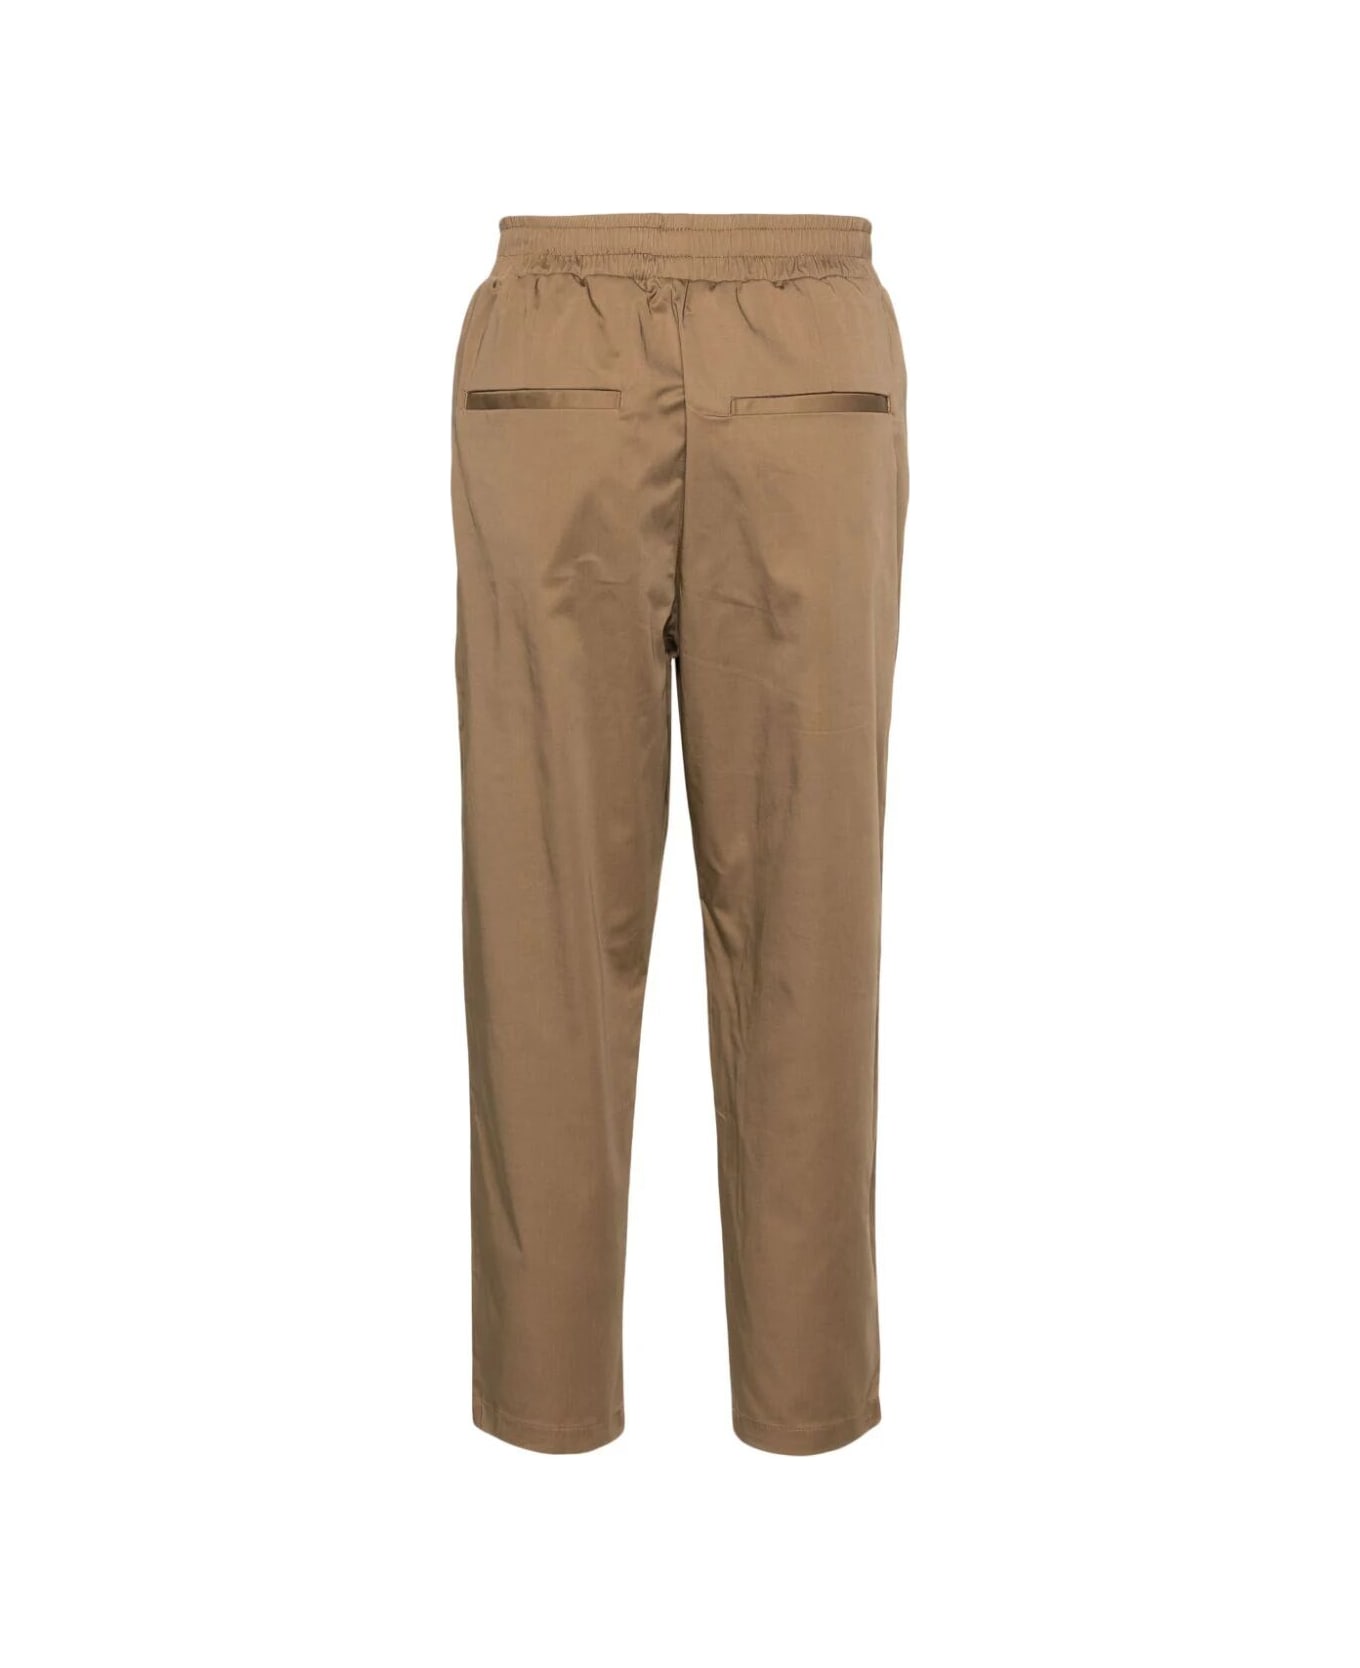 Family First Milano Chino Pants - Beige ボトムス